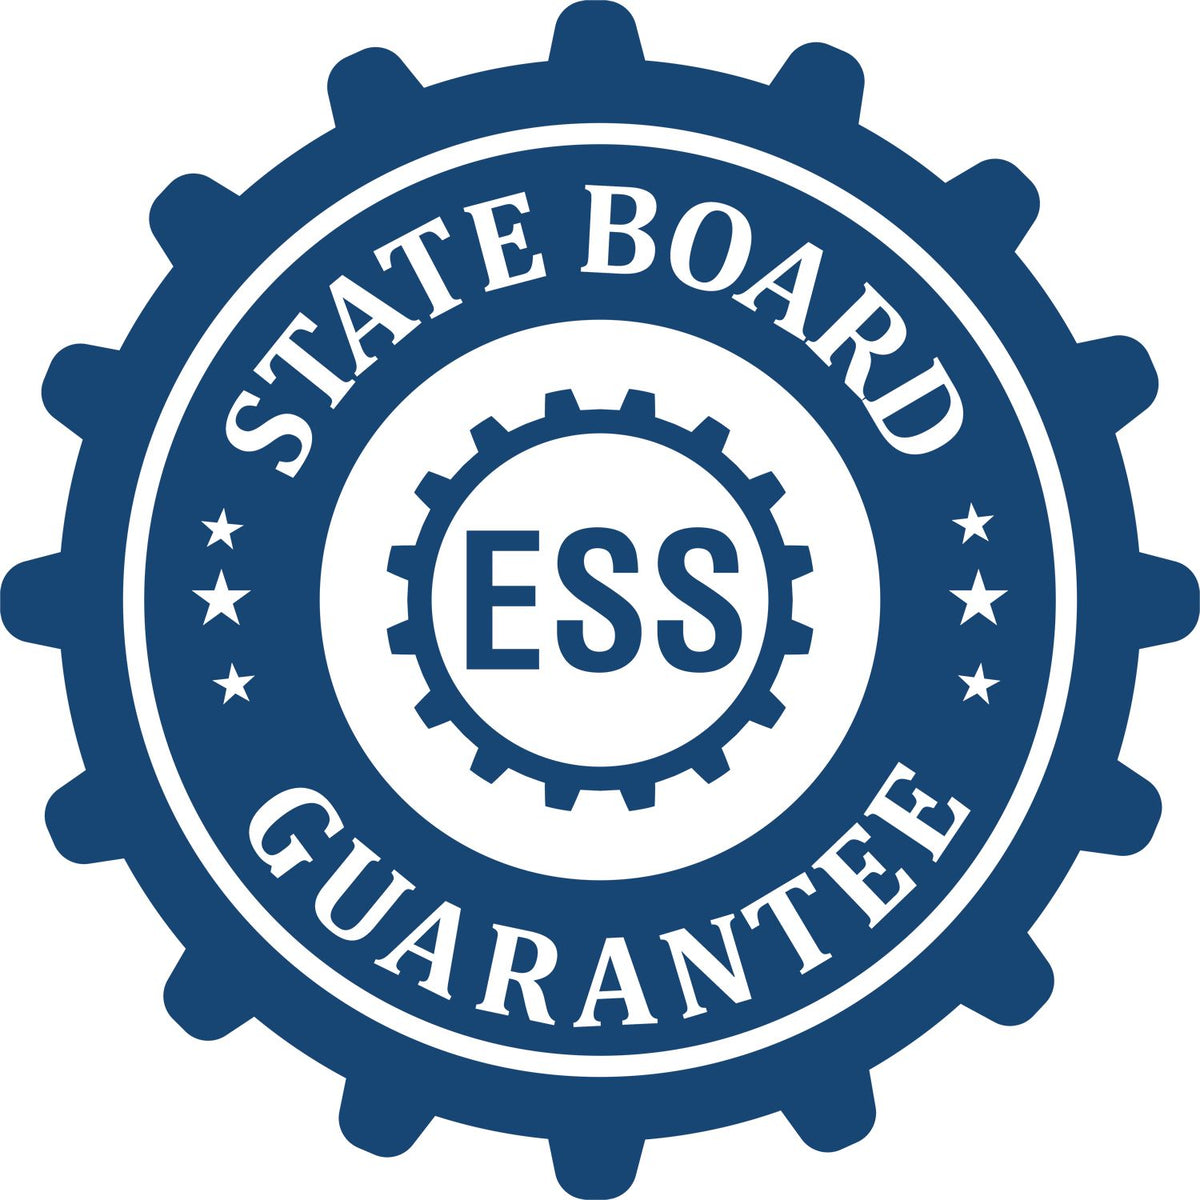 An emblem in a gear shape illustrating a state board guarantee for the Digital Texas Landscape Architect Stamp product.